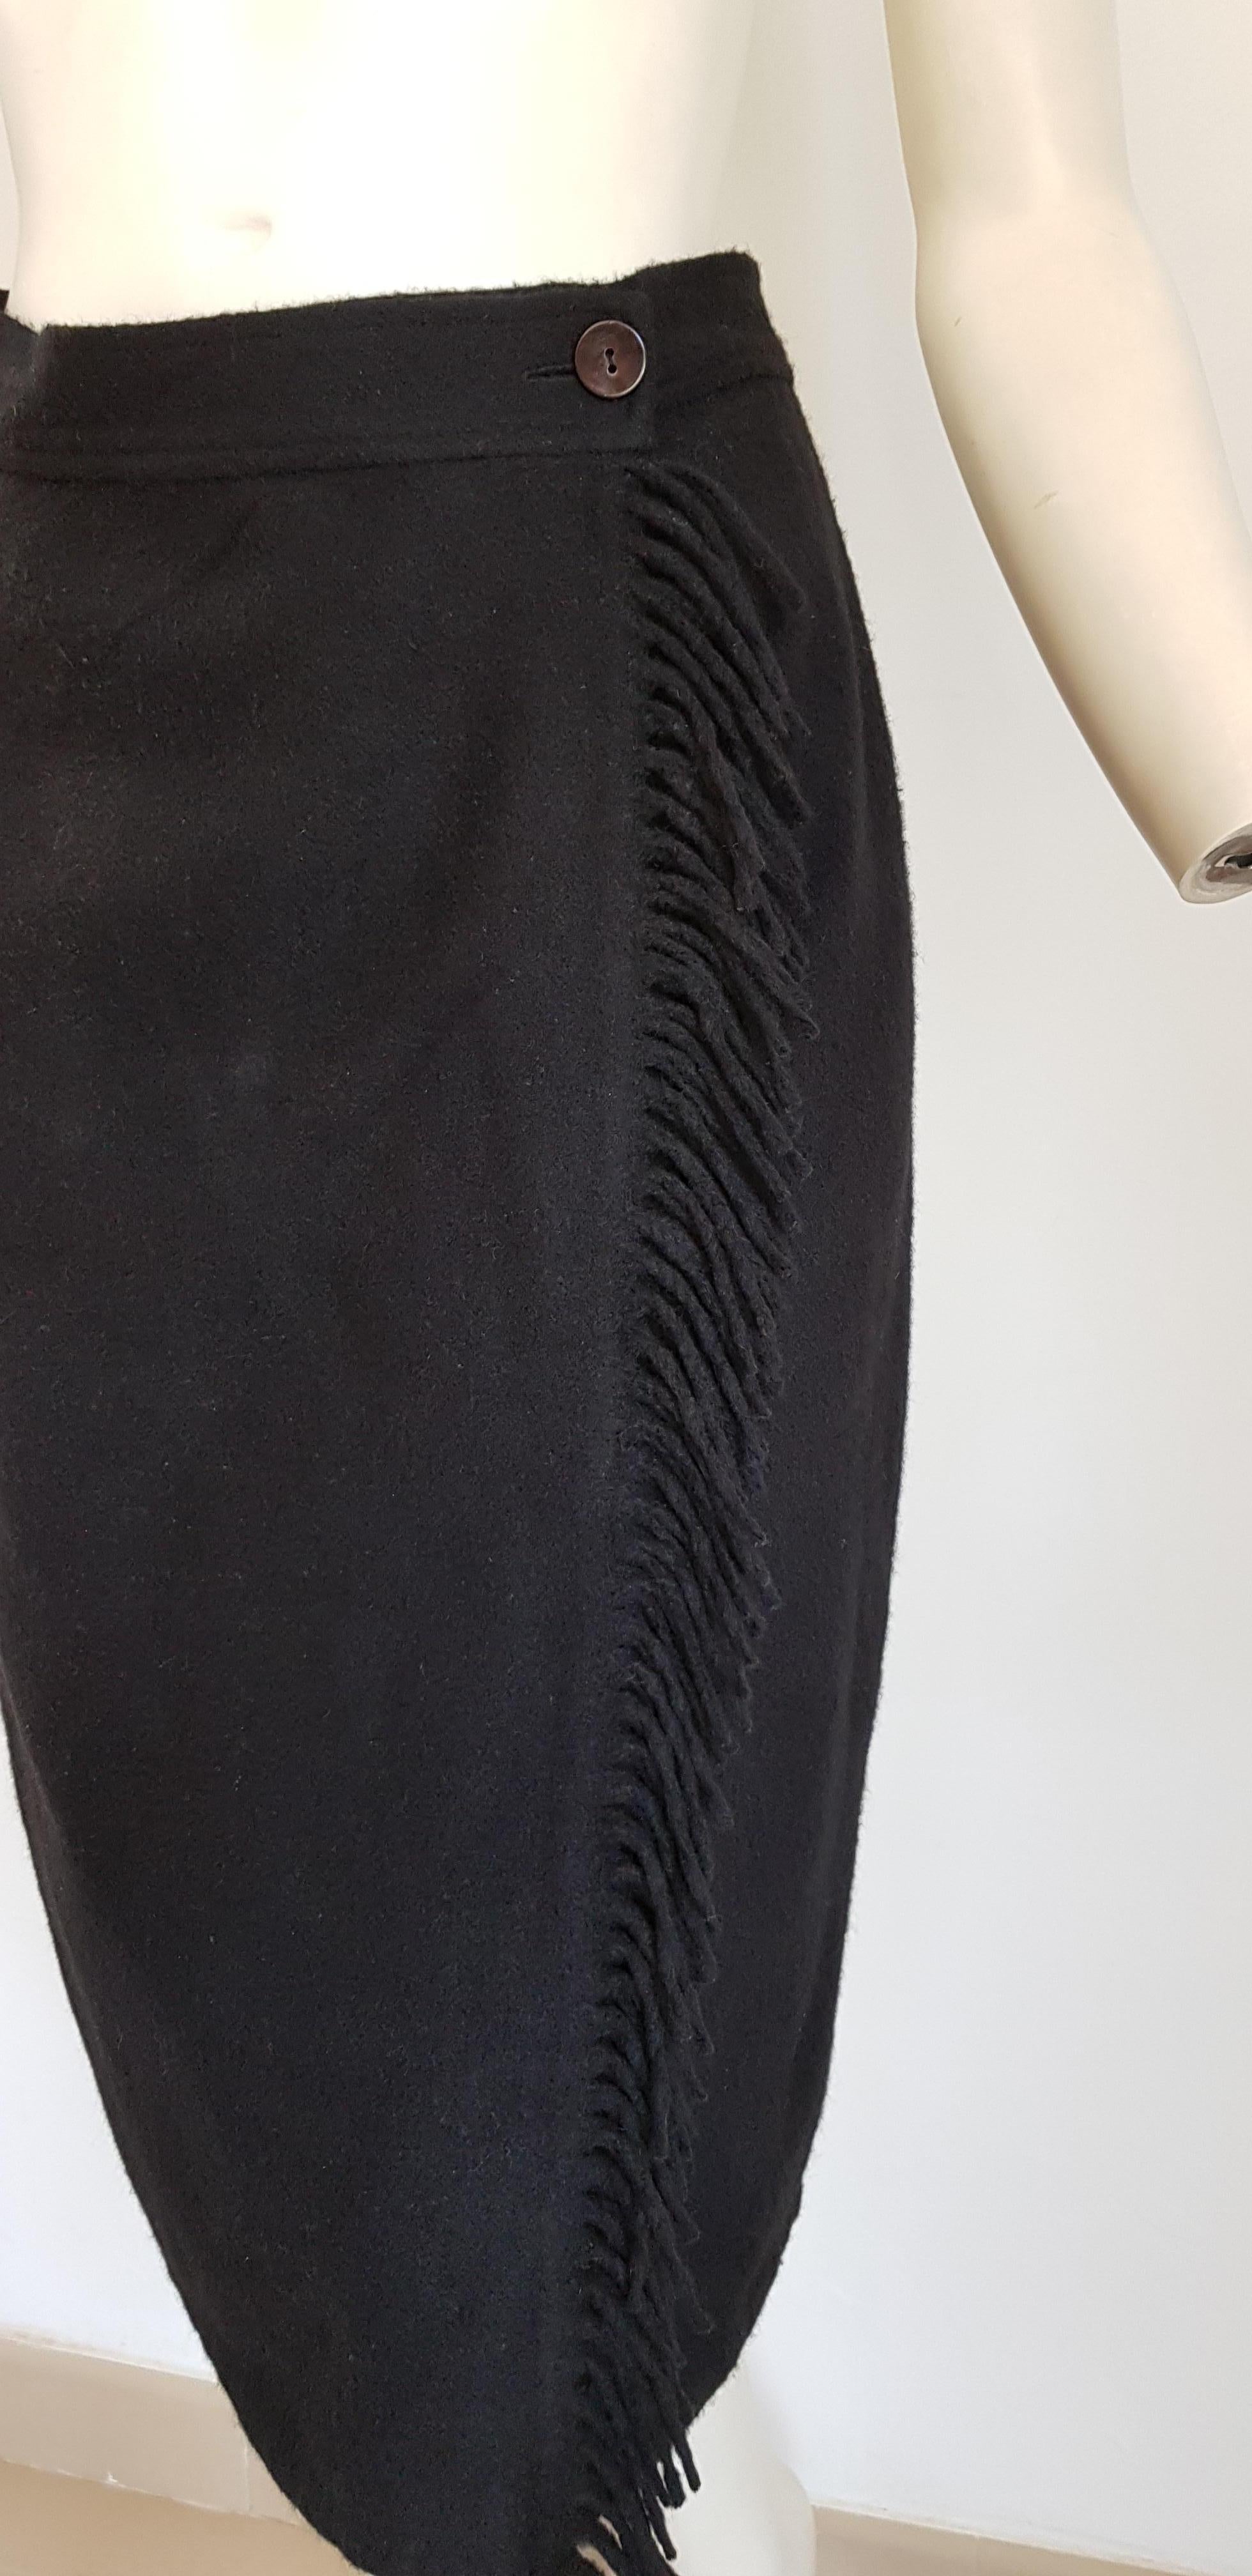 Laura BIAGIOTTI Cashemere Black Skirt Fringes Vertical Opening - Unworn, New.

SIZE: equivalent to about Small / Medium, please review approx measurements as follows in cm.  SKIRT: lenght 65, waist circumference 72, hip circumference 99. 
TO